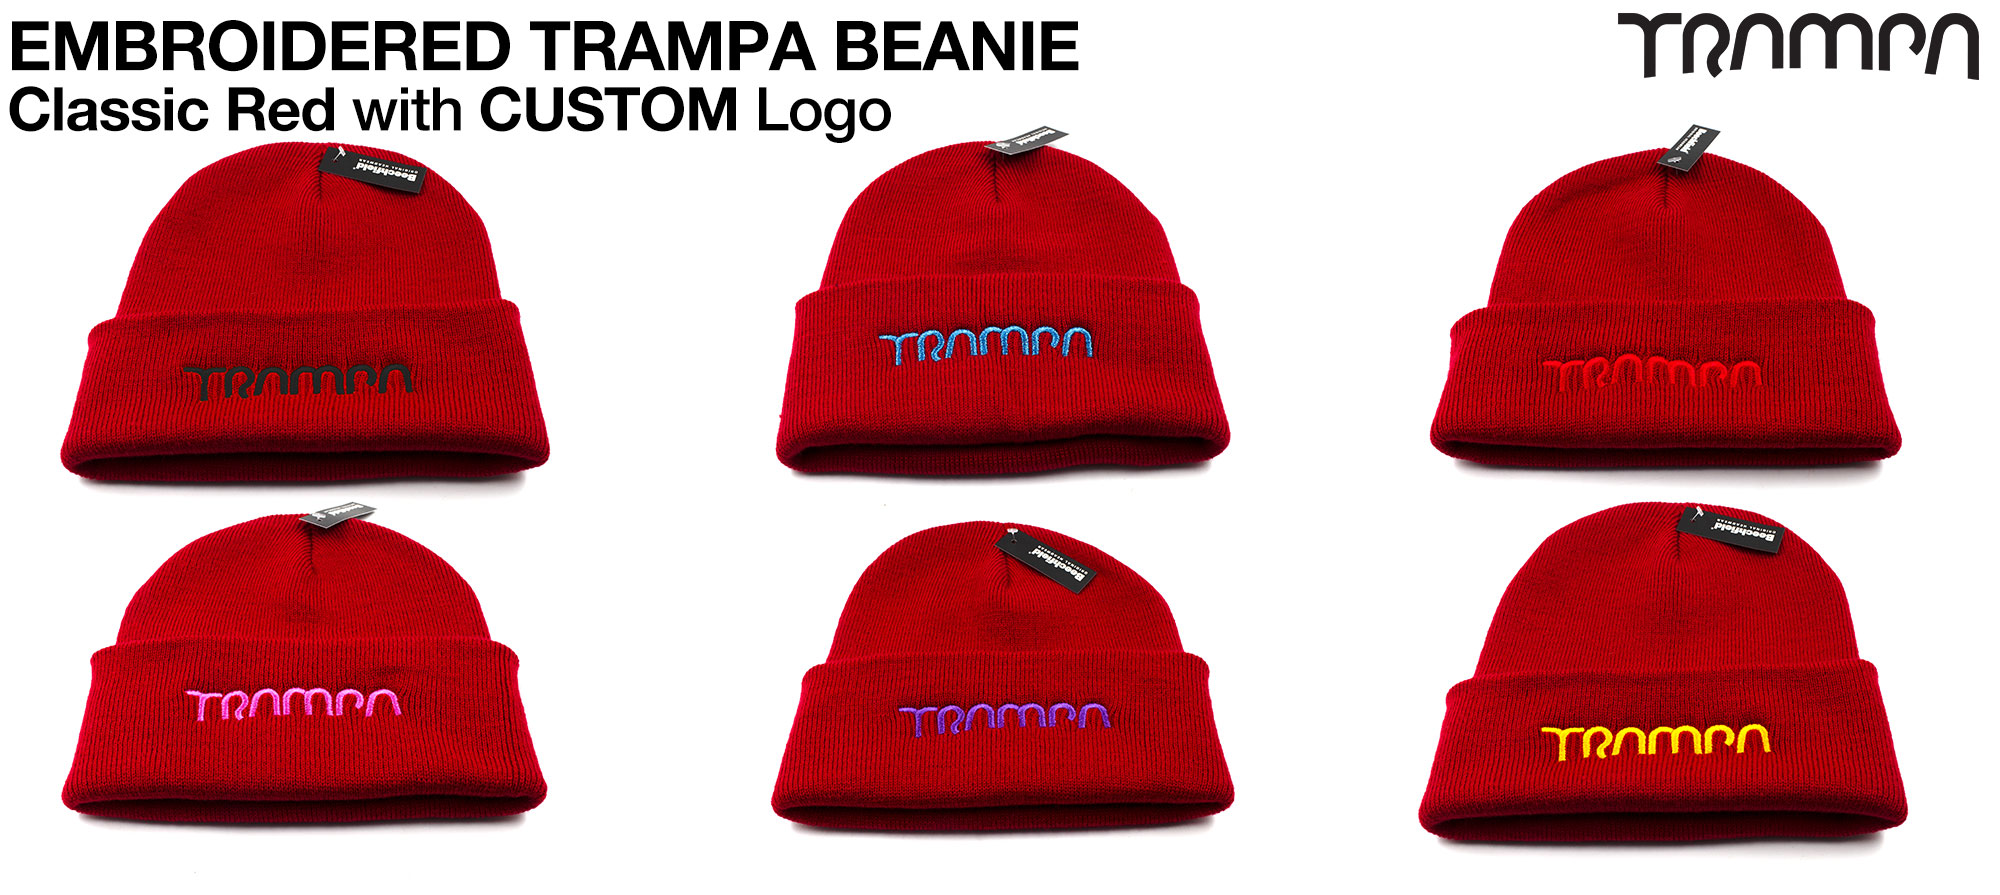 Classic RED Beanie with EMBROIDERED TRAMPA logo - Double thick turn over for extra warmth 